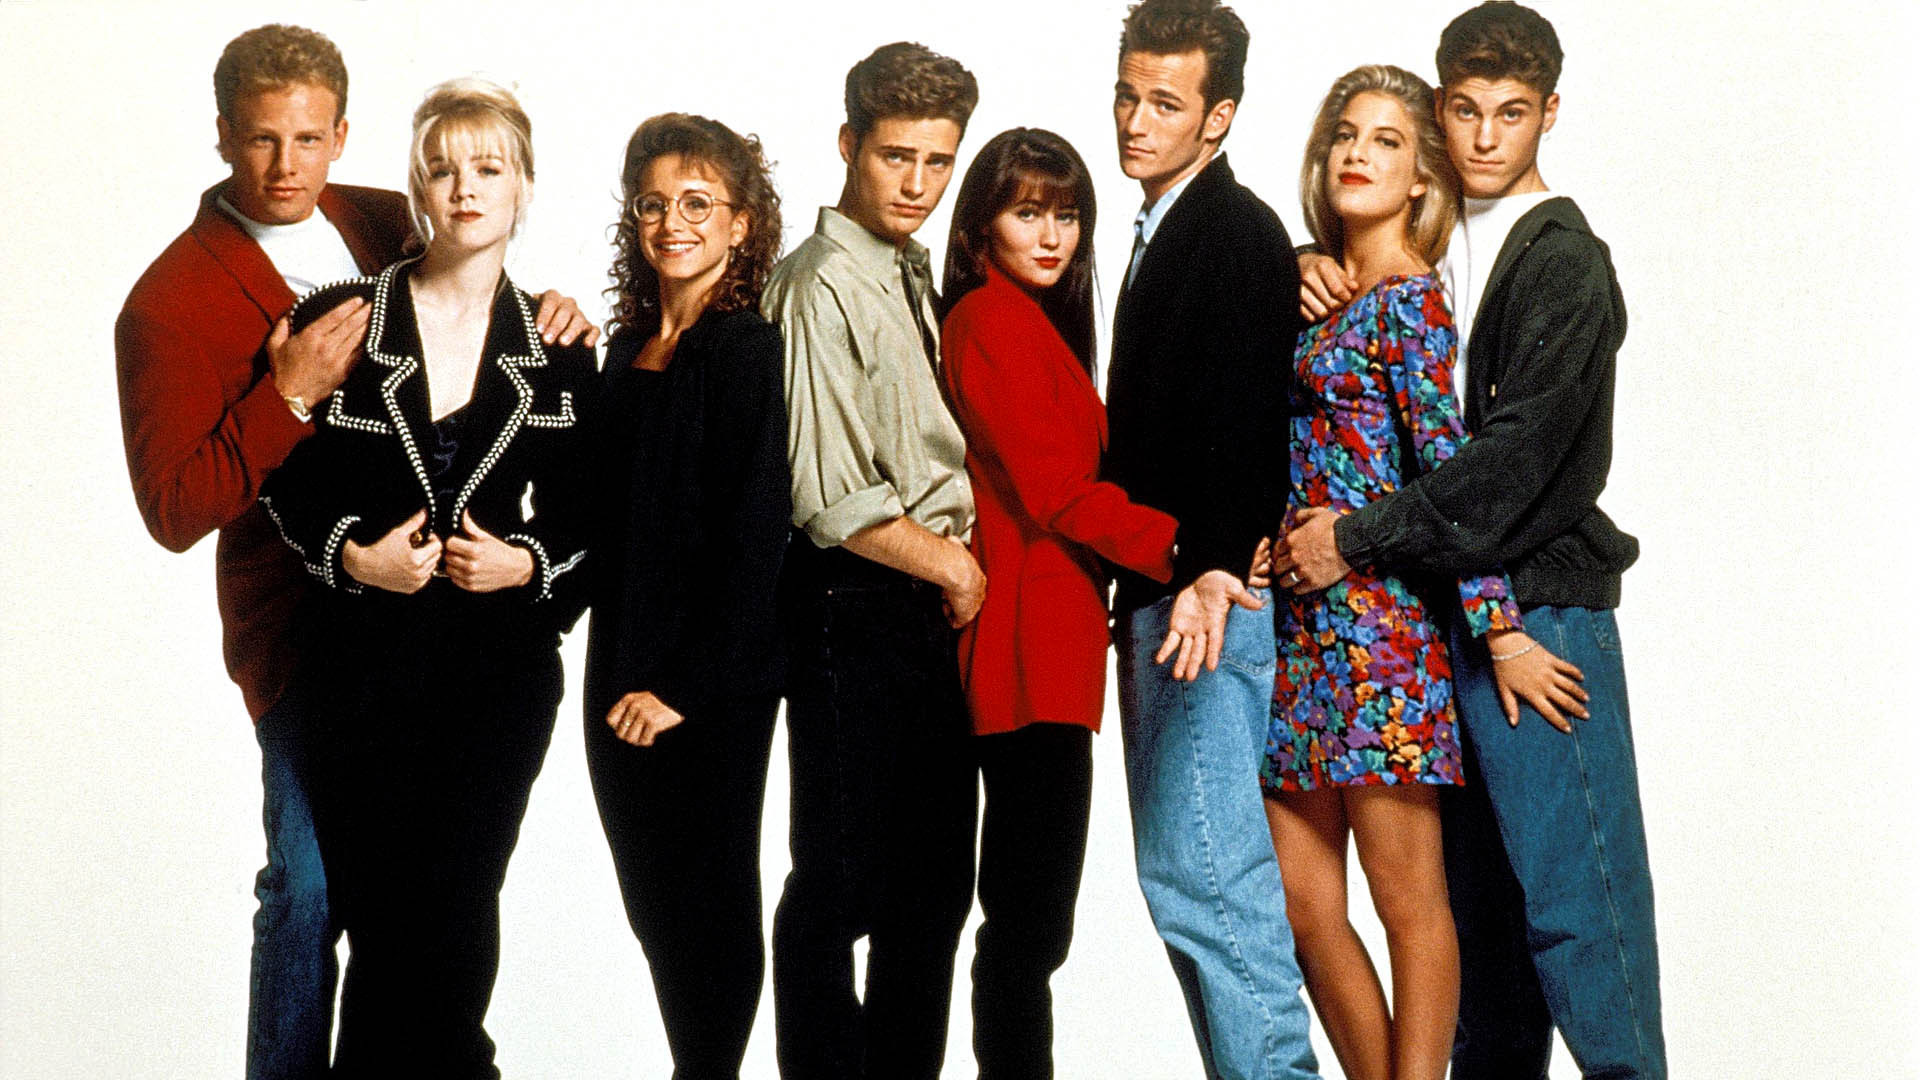 Beverly Hills, 90210 - The quintessential show for teens who think no one understands them and dream to move to Hollywood. Beverly Hills, 90210 followed a brother and sister as they experience high school, love triangles, betrayal, college, leaving the show, having sideburns unironically, among a slew of other privileged troubles .